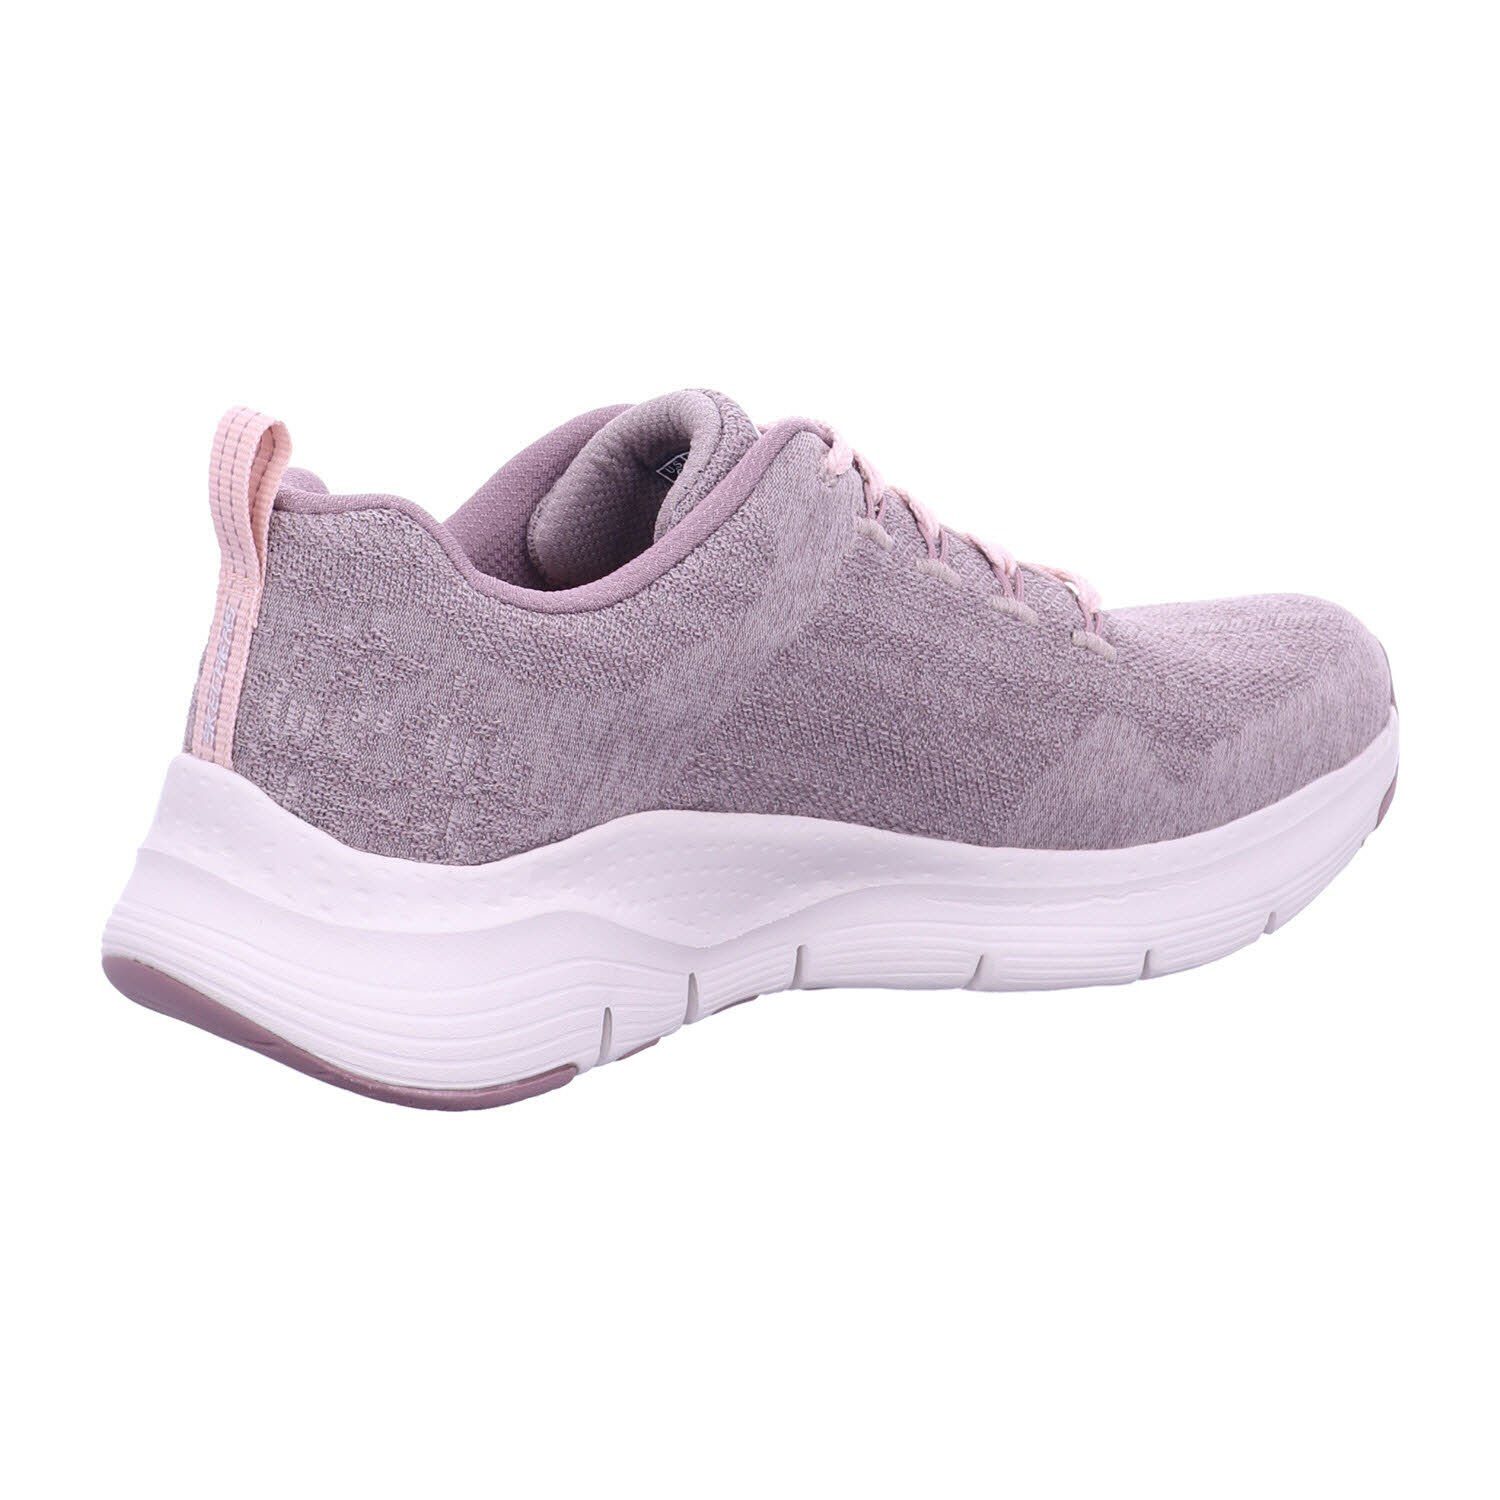 Sneaker dark FIT - WAVE Skechers COMFY taupe ARCH (2-tlg)